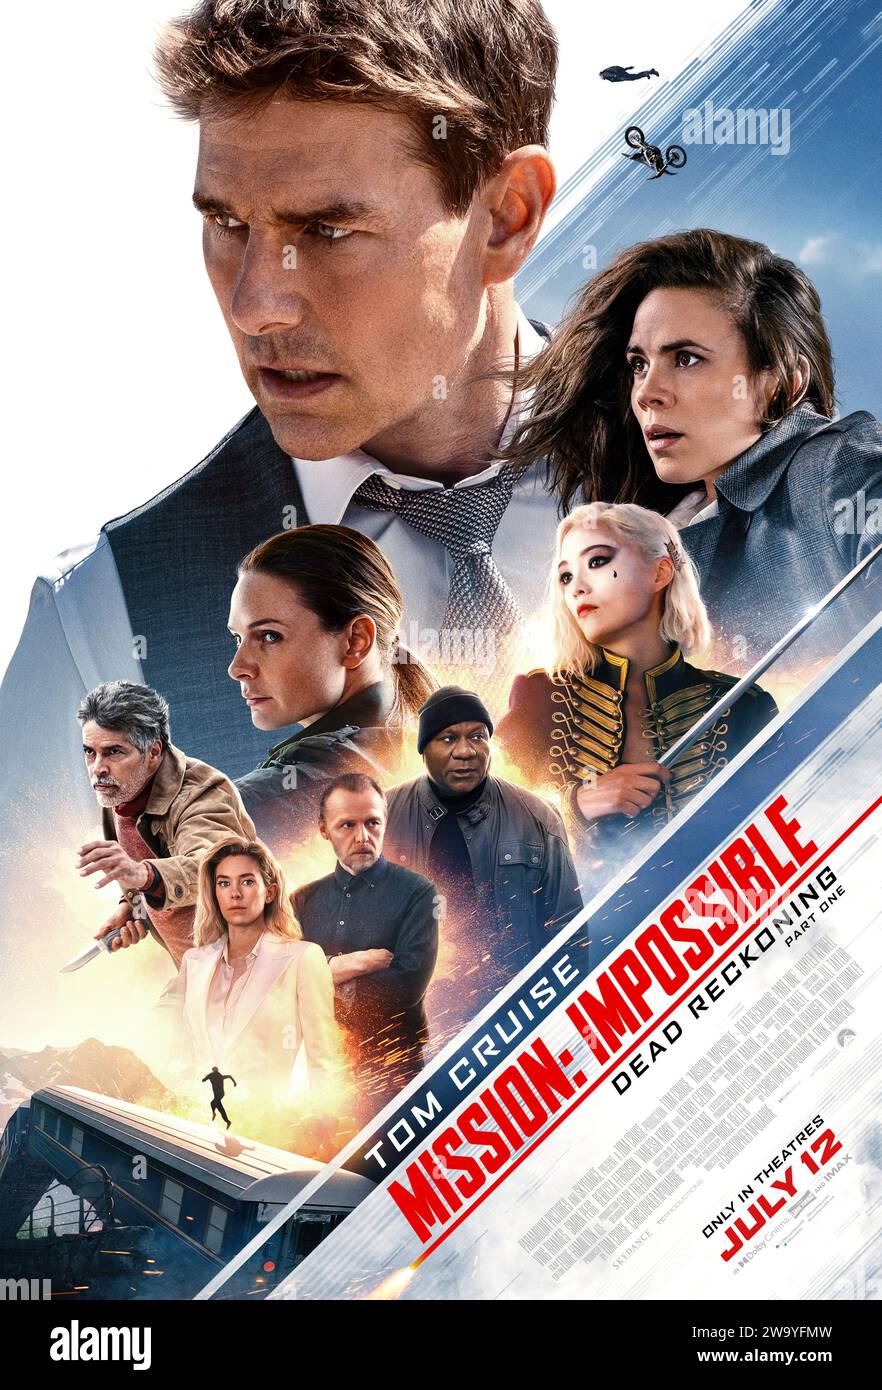 Mission: Impossible - Dead Reckoning Part One (2023) directed by Christopher McQuarrie and starring Tom Cruise, Hayley Atwell and Ving Rhames. Ethan Hunt and his IMF team must track down a dangerous weapon before it falls into the wrong hands. US one sheet poster ***EDITORIAL USE ONLY***. Credit: BFA / Paramount Pictures Stock Photo